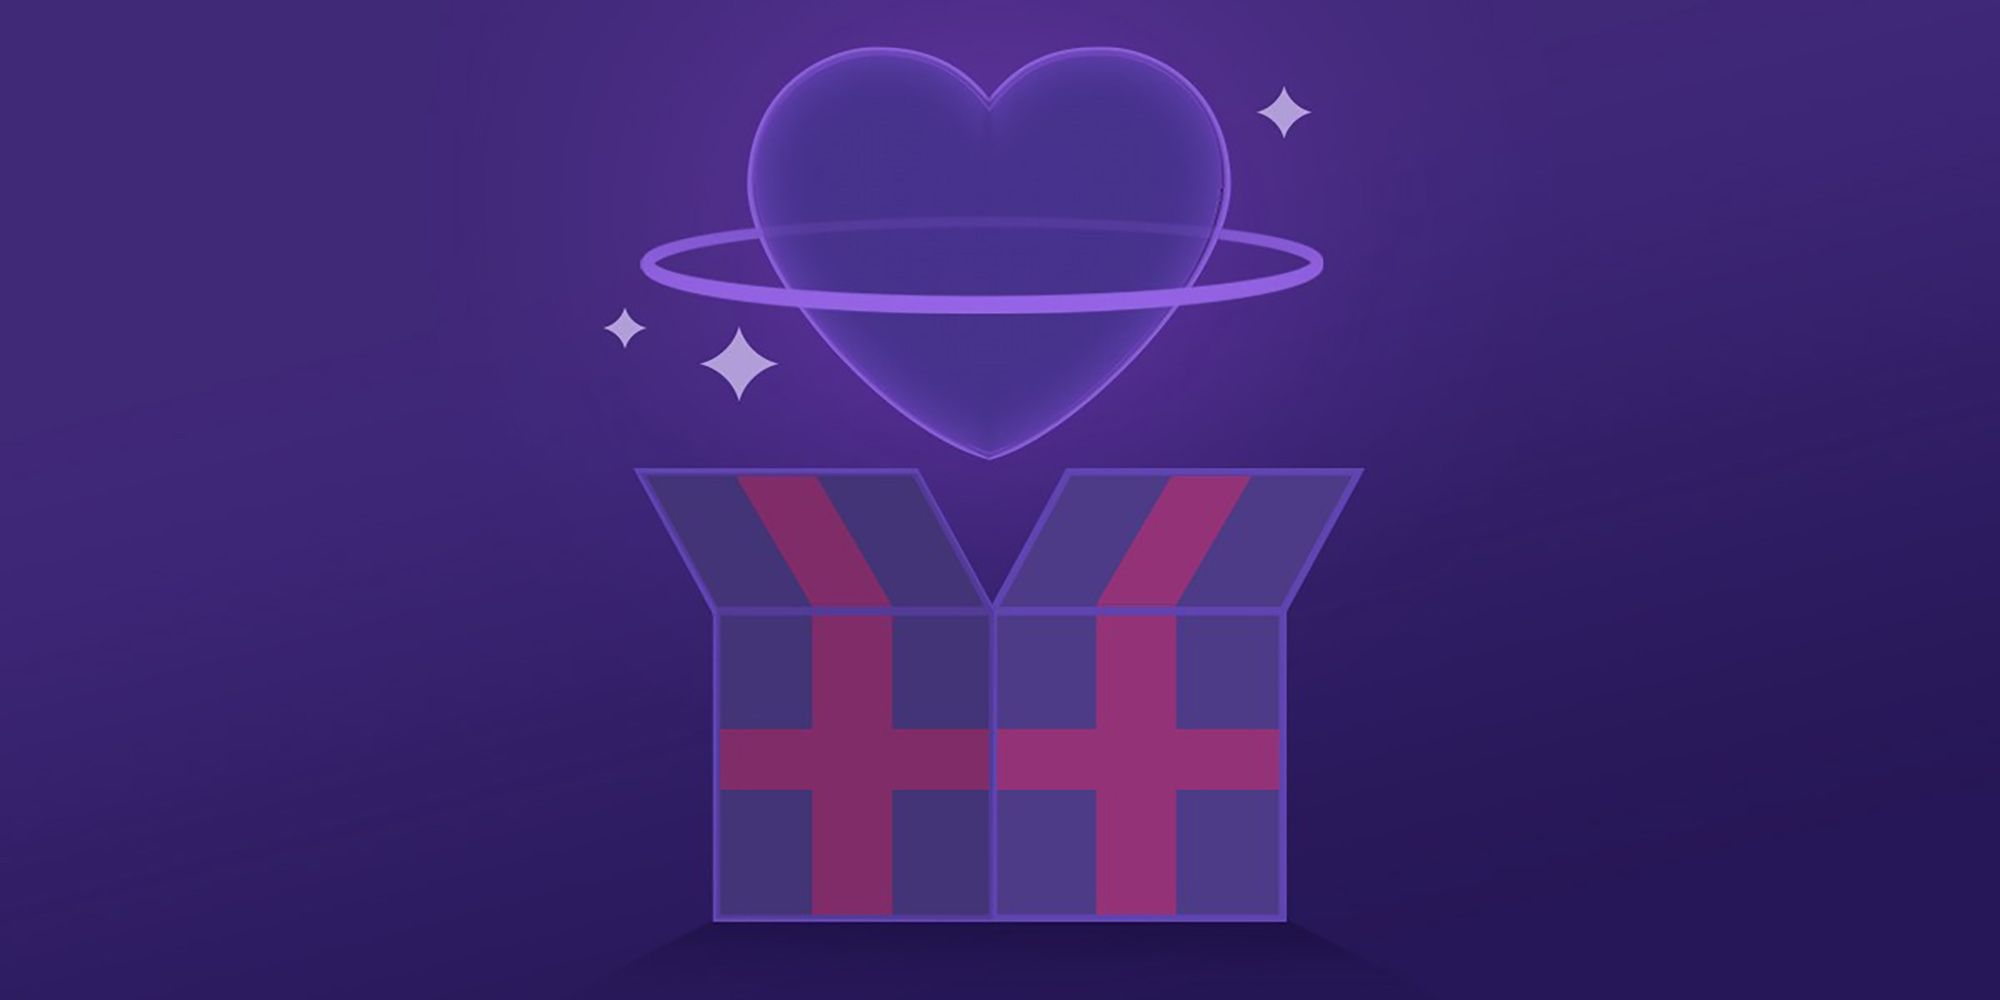 A heart emerges from a purple and pink gift box.